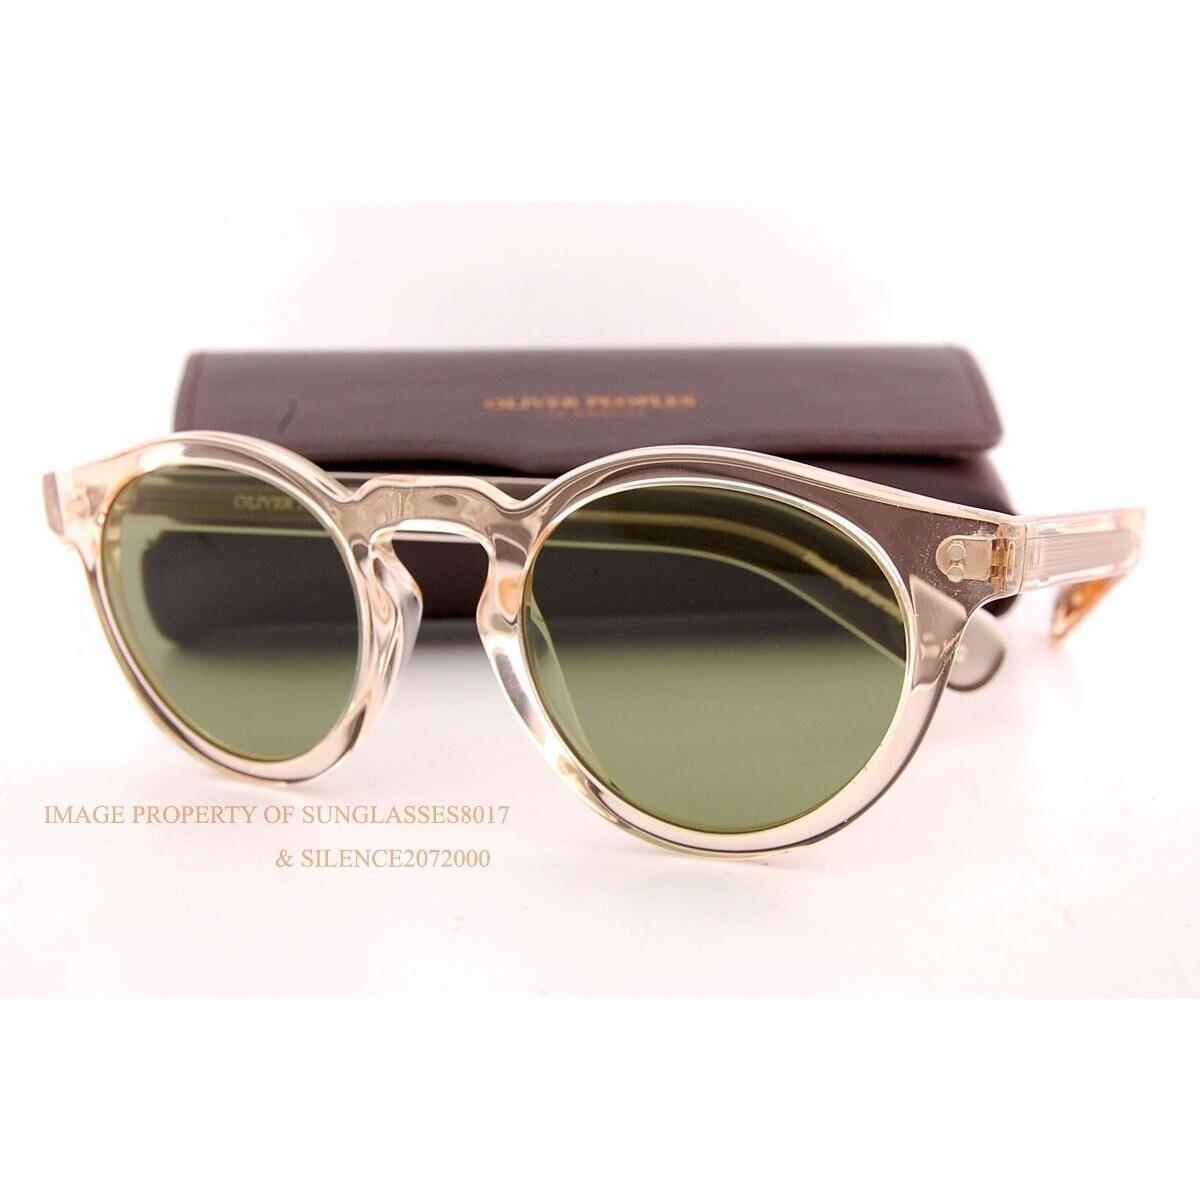 Oliver Peoples Sunglasses Martineaux OV 5450/SU 109452 Buff/green - Frame: , Lens: Green